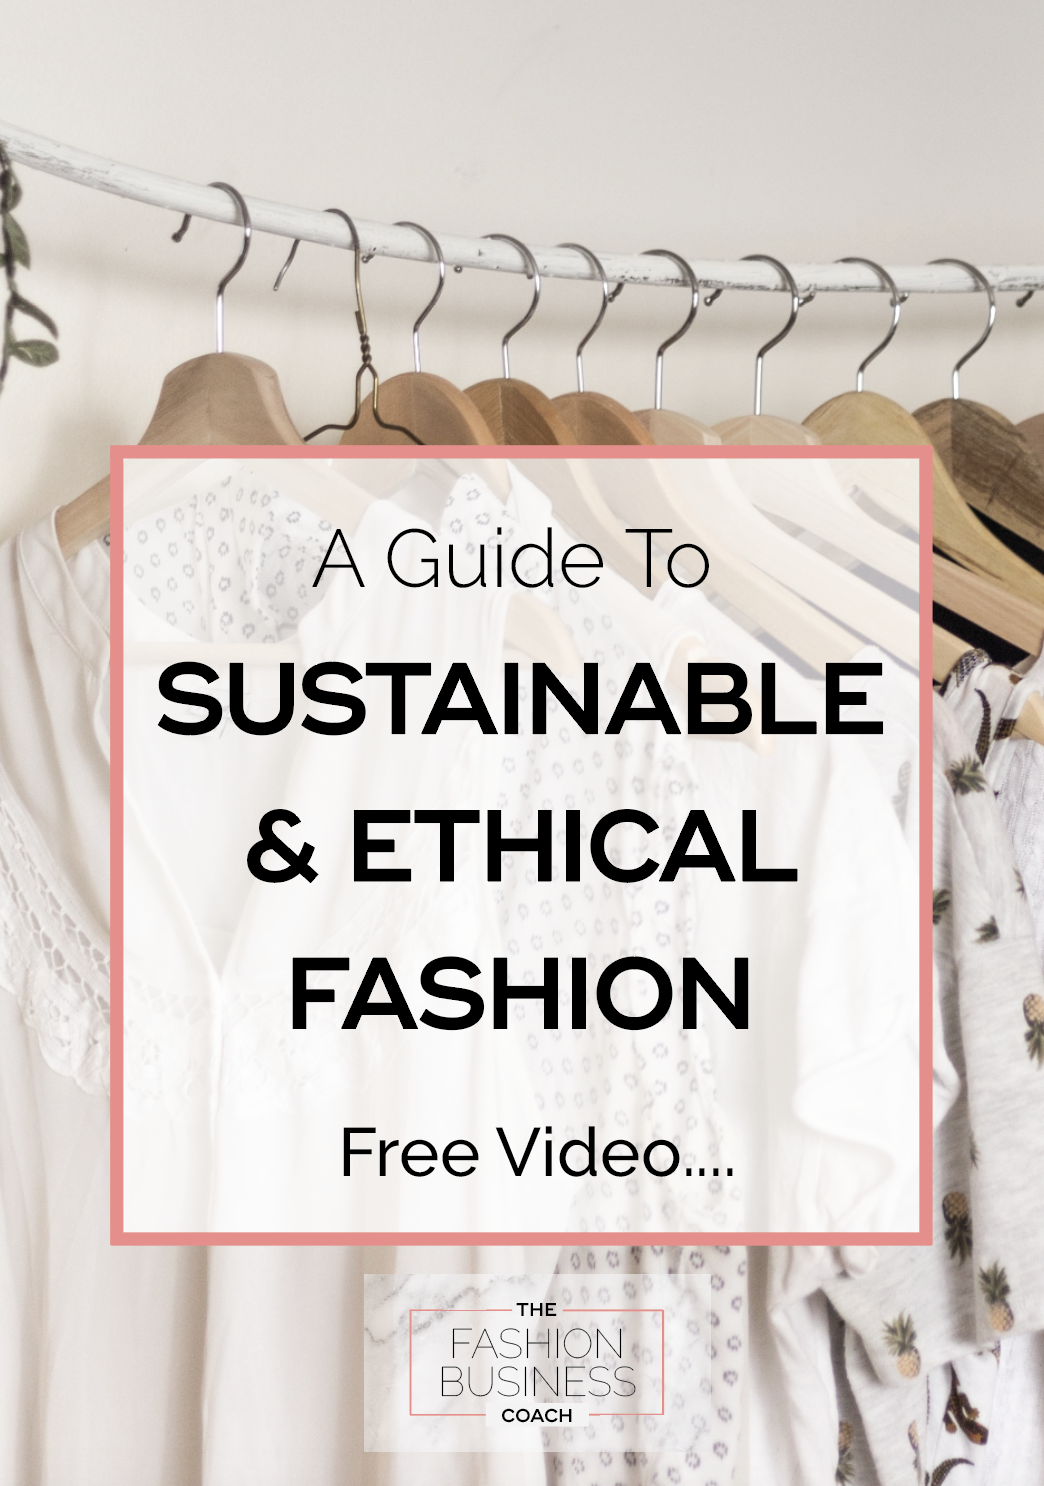 A Guide To Sustainable & Ethical Fashion 4.png